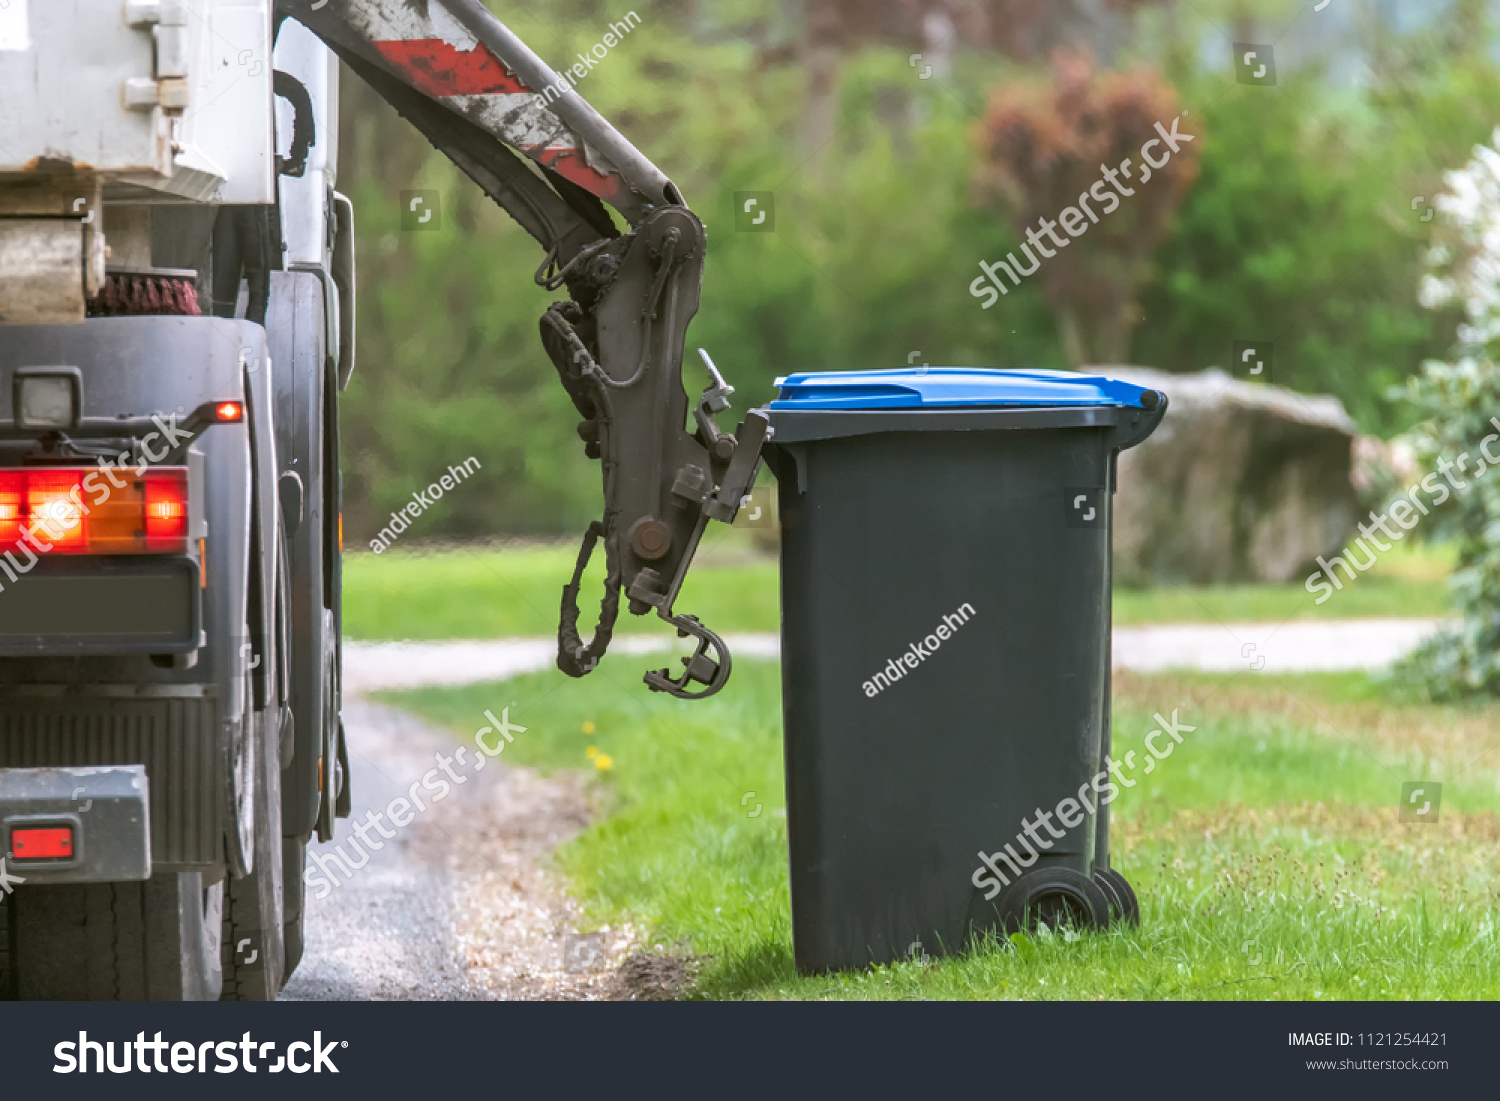 Municipal waste disposal. With a special car garbage truck, the garbage from the garbage bin is loaded into the car. Concept: Waste disposal and cleanliness #1121254421